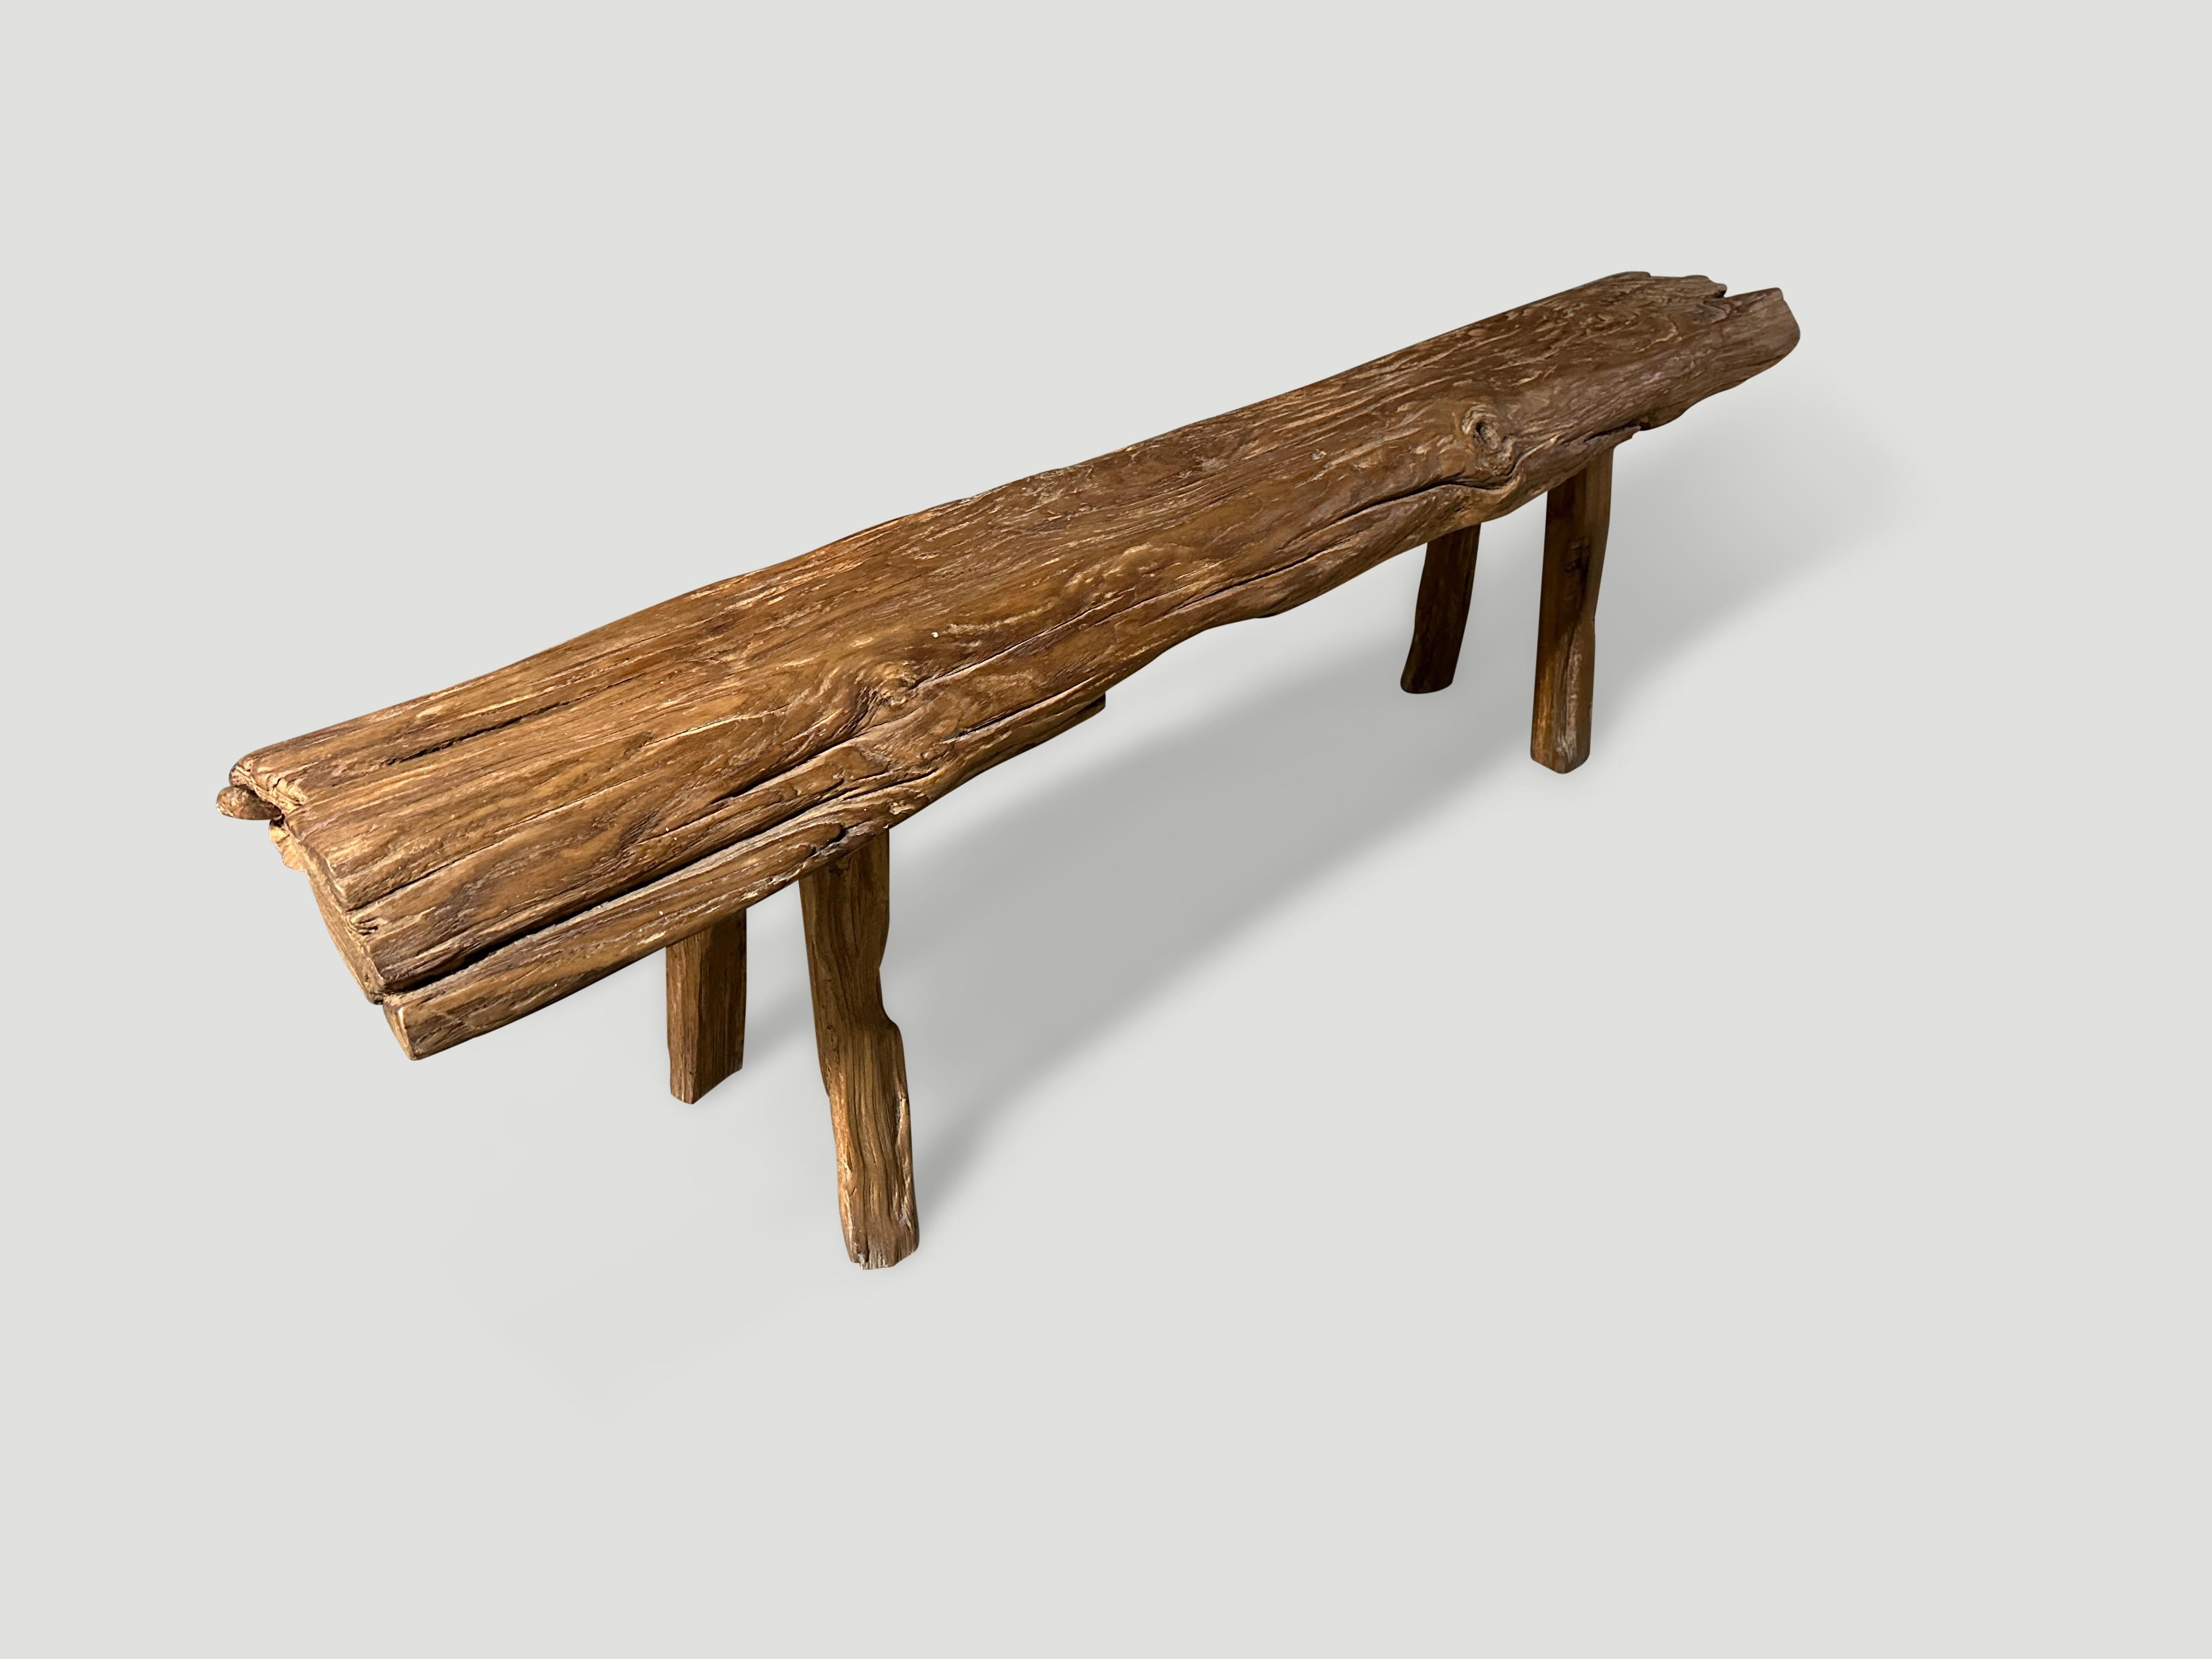 Antique bench with beautiful character hand made from a single 3.5″ thick teak log with lovely patina. Circa 1950. The width varies from 11-9” wide.

This bench was hand made in the spirit of Wabi-Sabi, a Japanese philosophy that beauty can be found